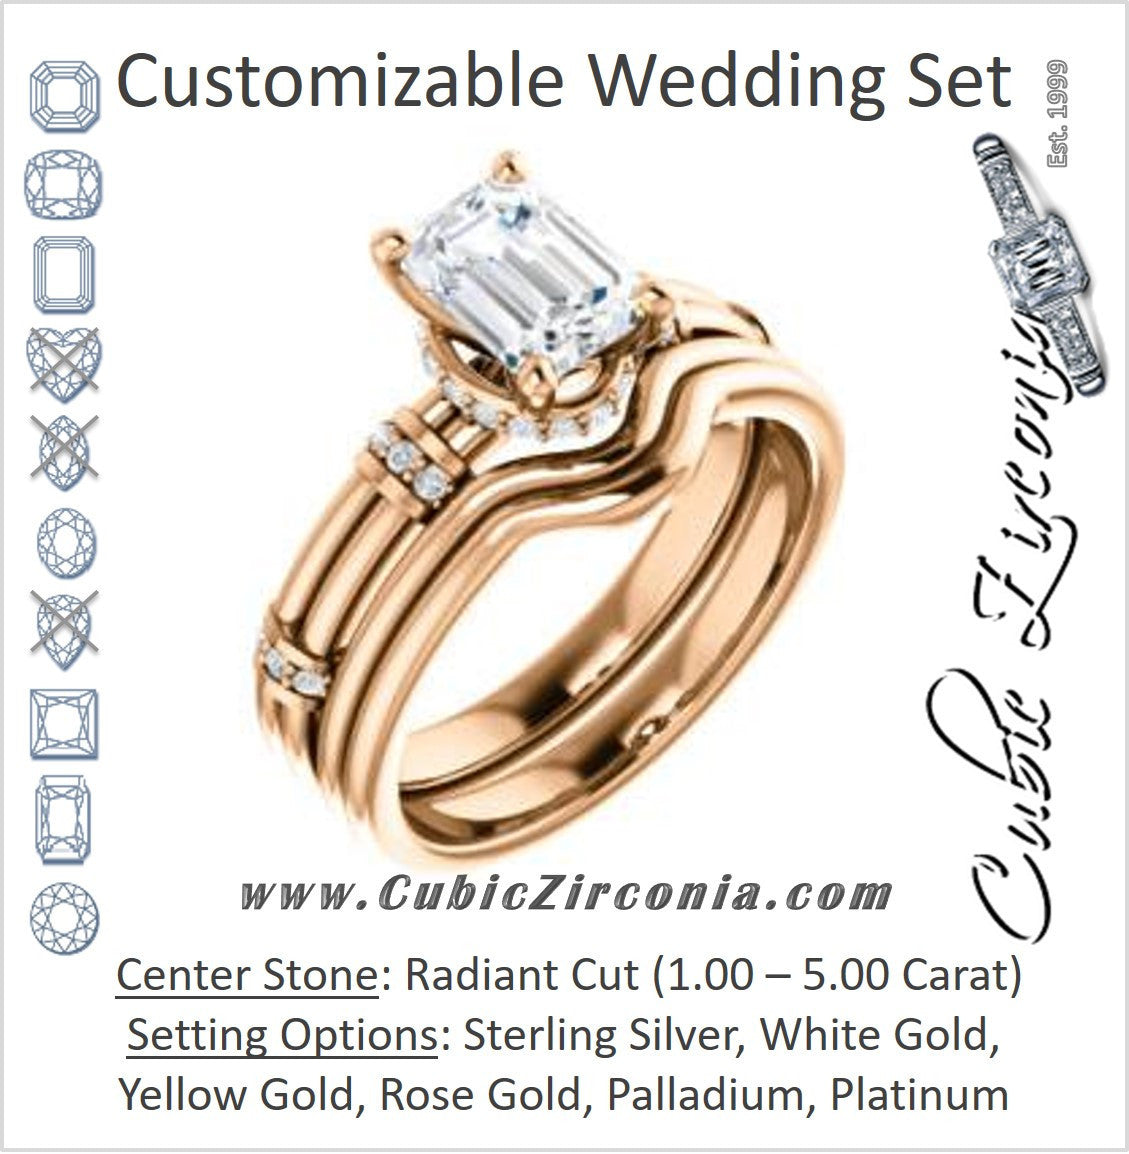 CZ Wedding Set, featuring The Jayla engagement ring (Customizable Radiant Cut Style with Under-Halo & Horizontal Band Accents)